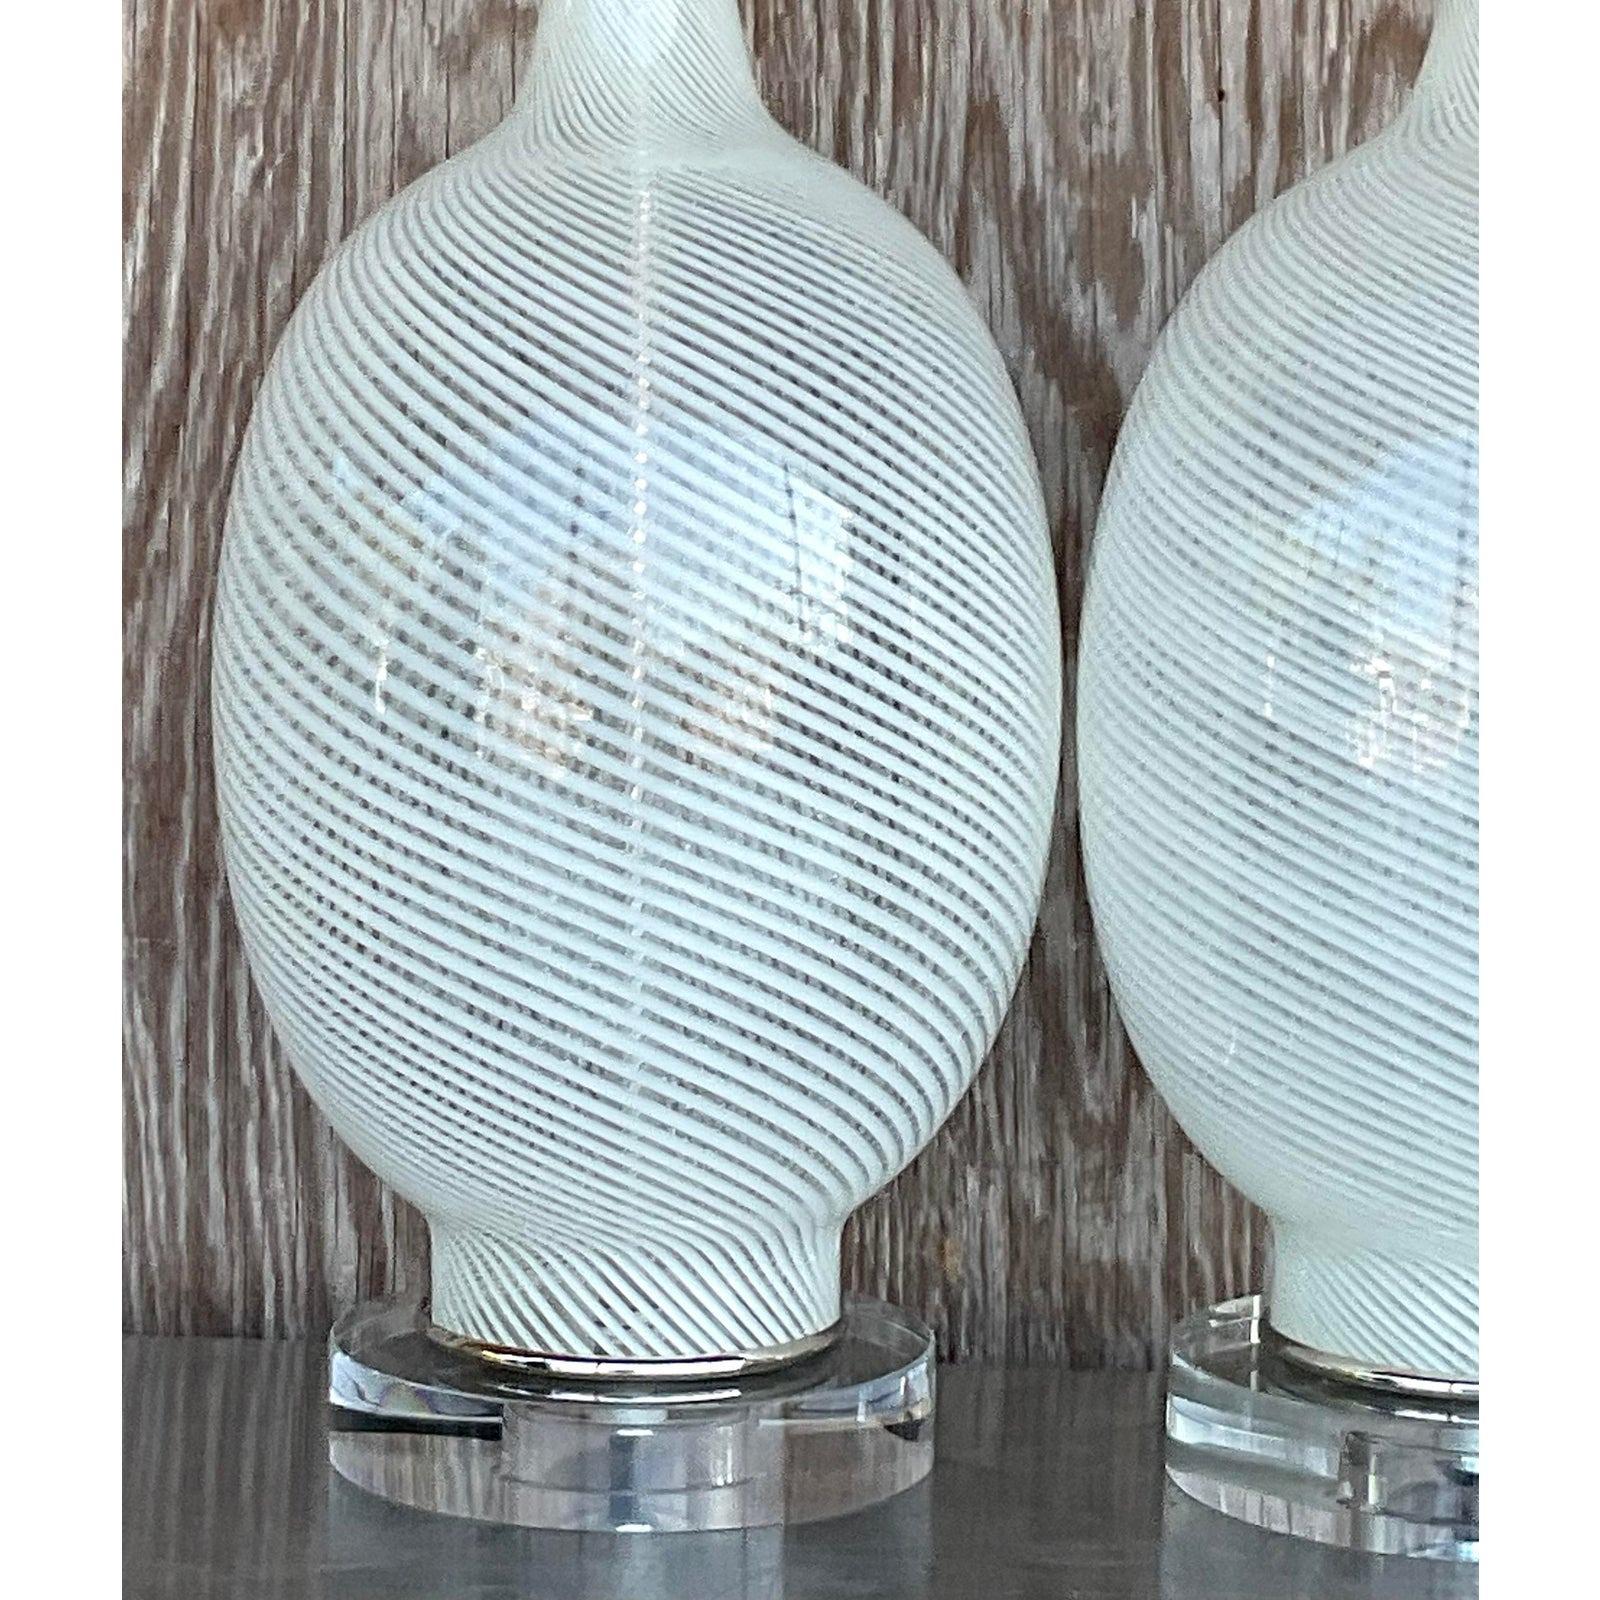 A stunning pair of vintage Italian Murano lamps. A beautiful swirl design in a pale celadon color. Fully restored with all new wiring, hardware and lucite plinths. Acquired from a Palm Beach estate.